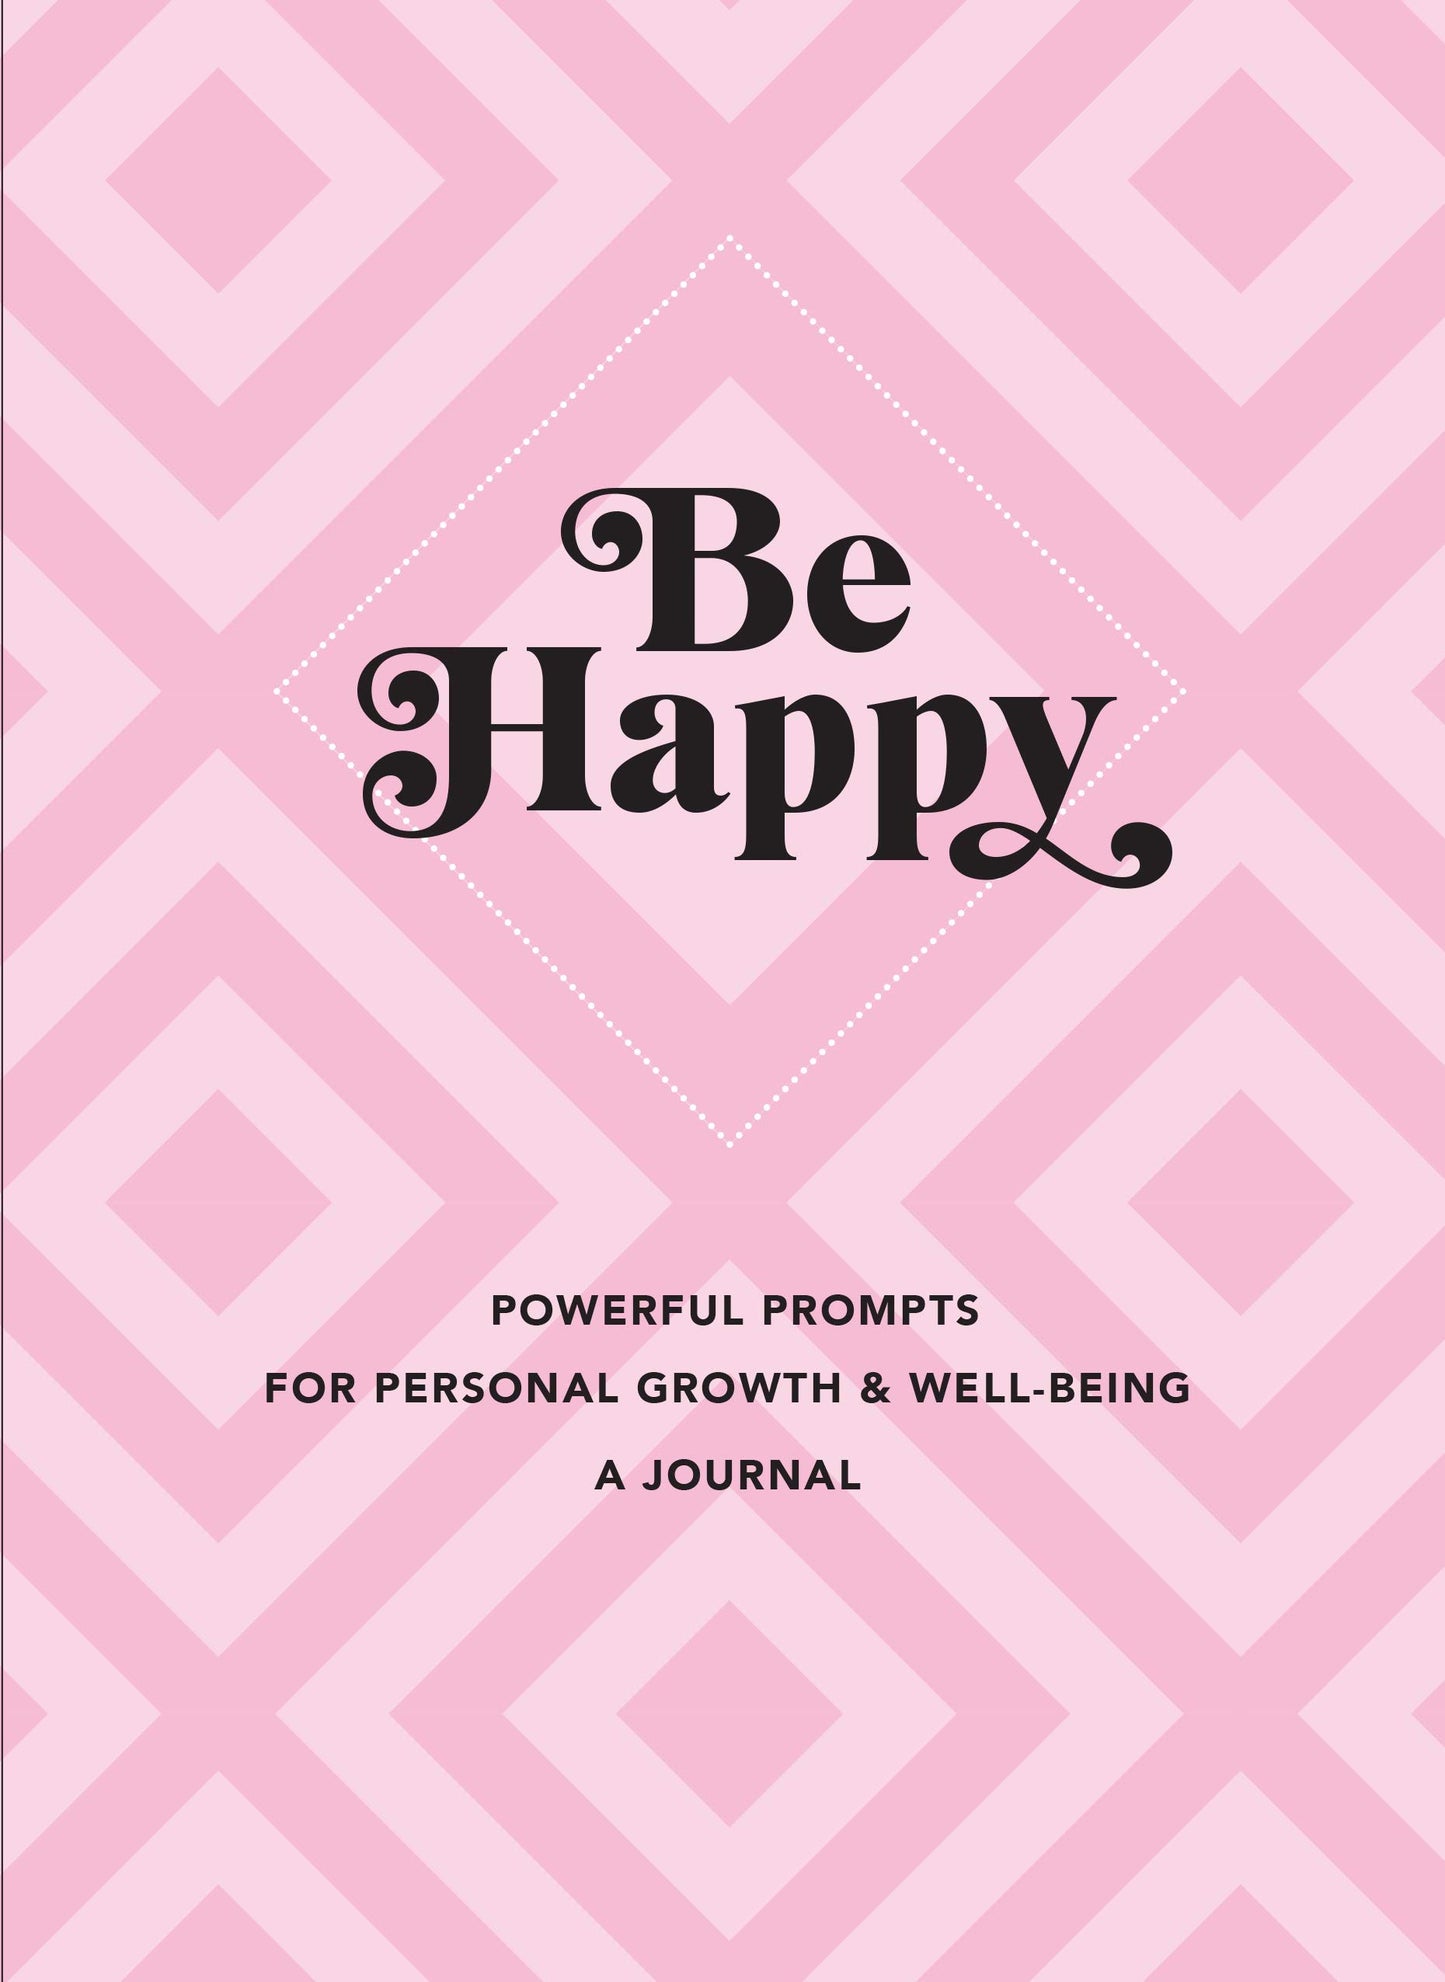 Be Happy - A Journal: Powerful Prompts for Personal Growth and Well-Being